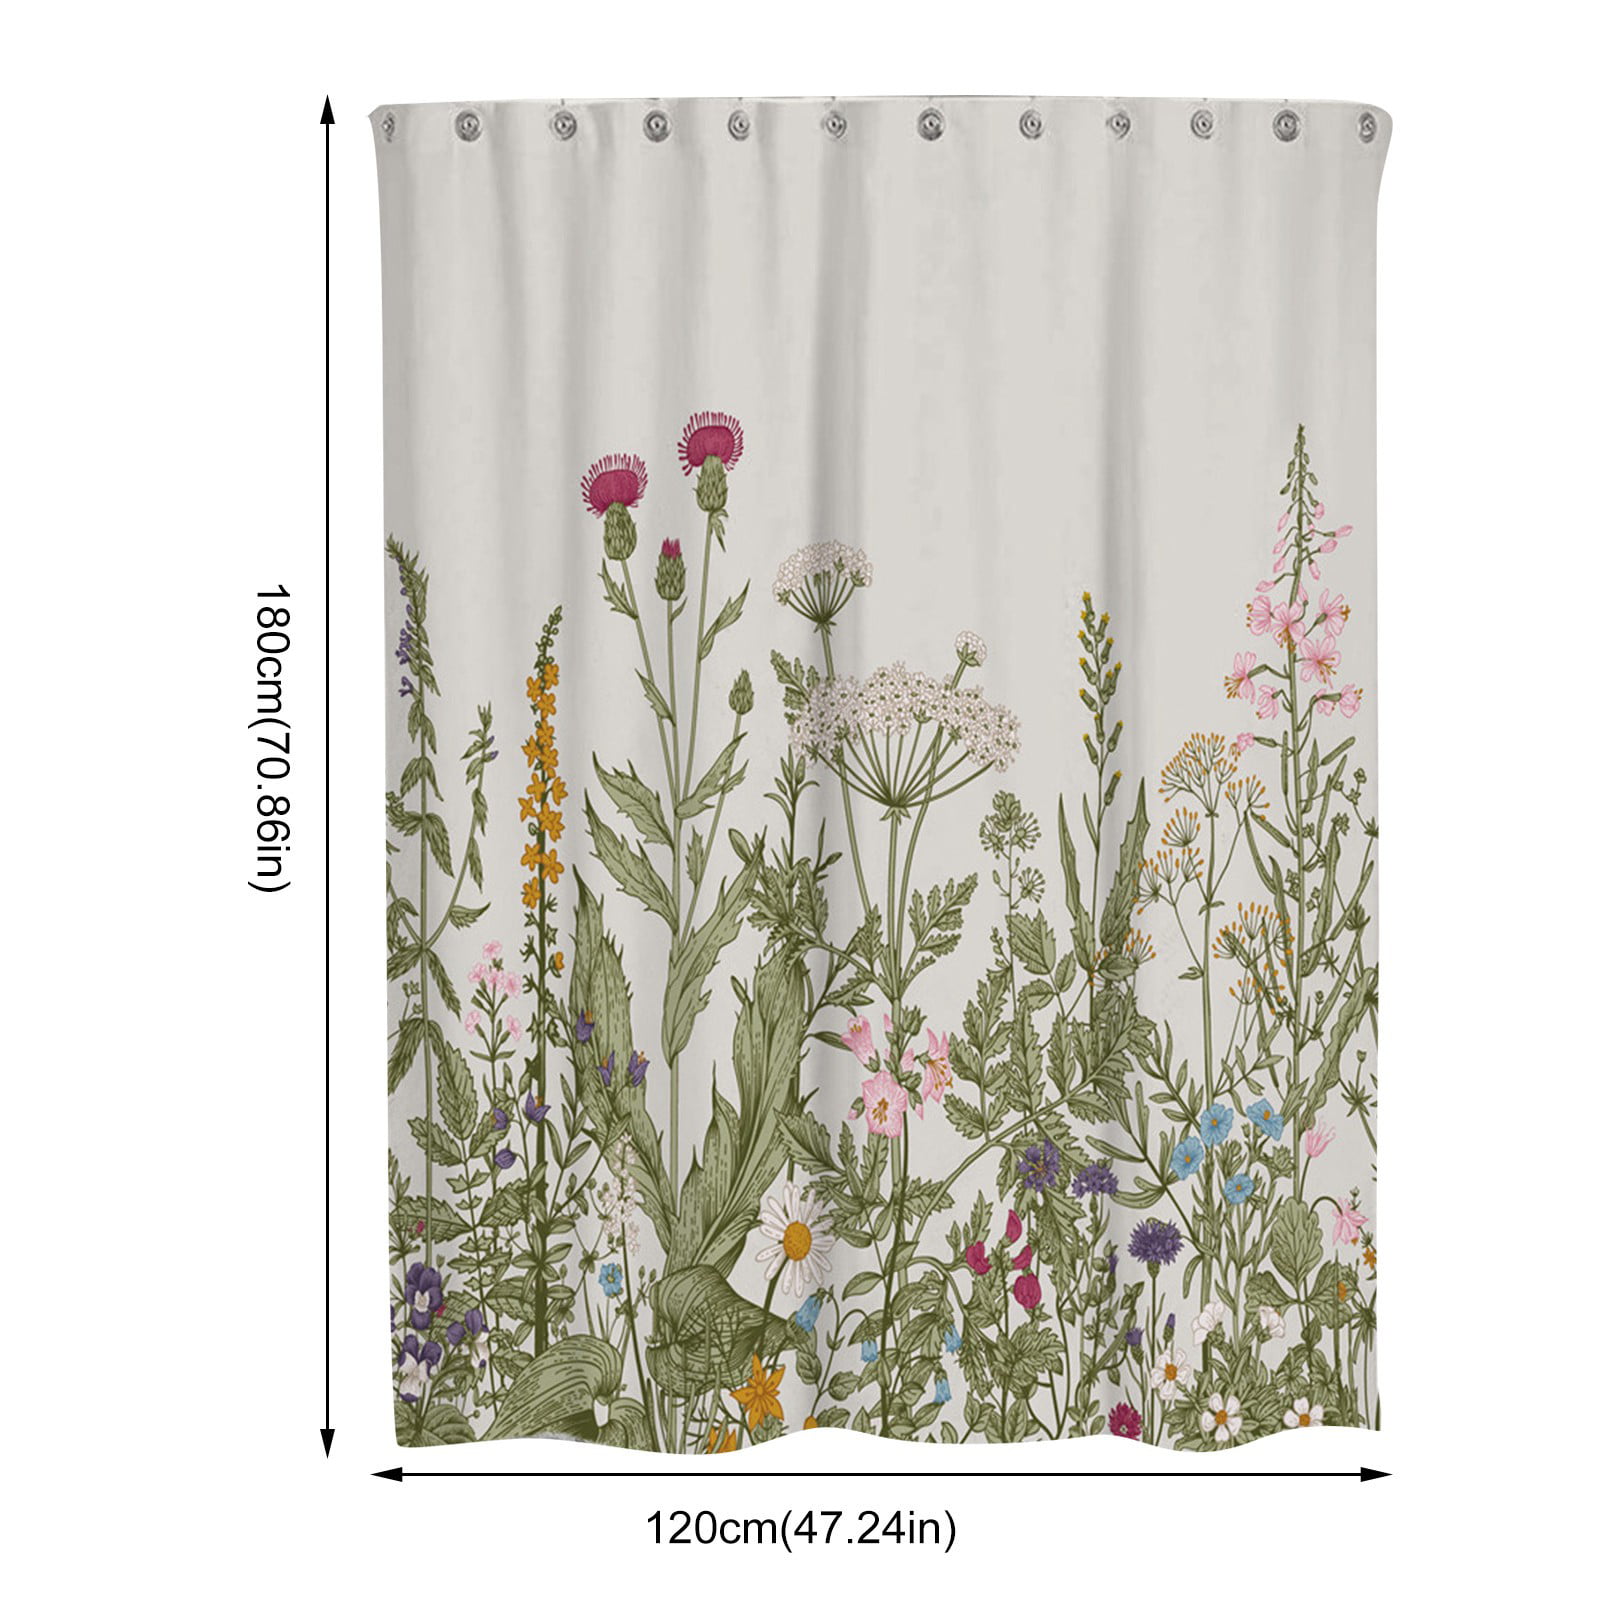 Multicolored Spring Flowers Bathroom Fabric Shower Curtain With Hooks 71" 